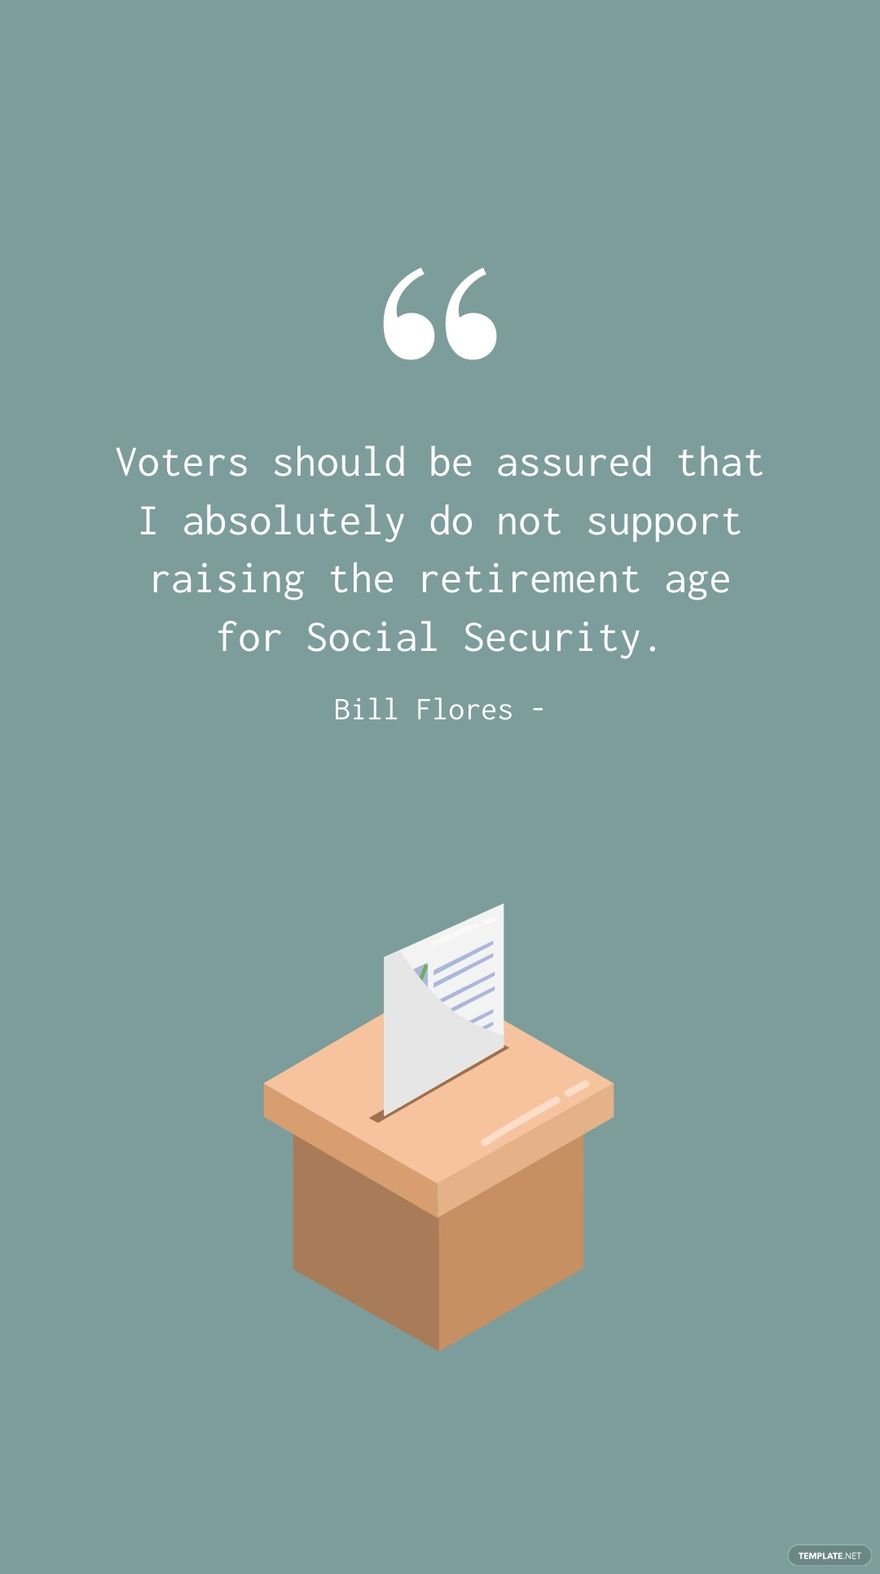 Free Bill Flores - Voters should be assured that I absolutely do not support raising the retirement age for Social Security.